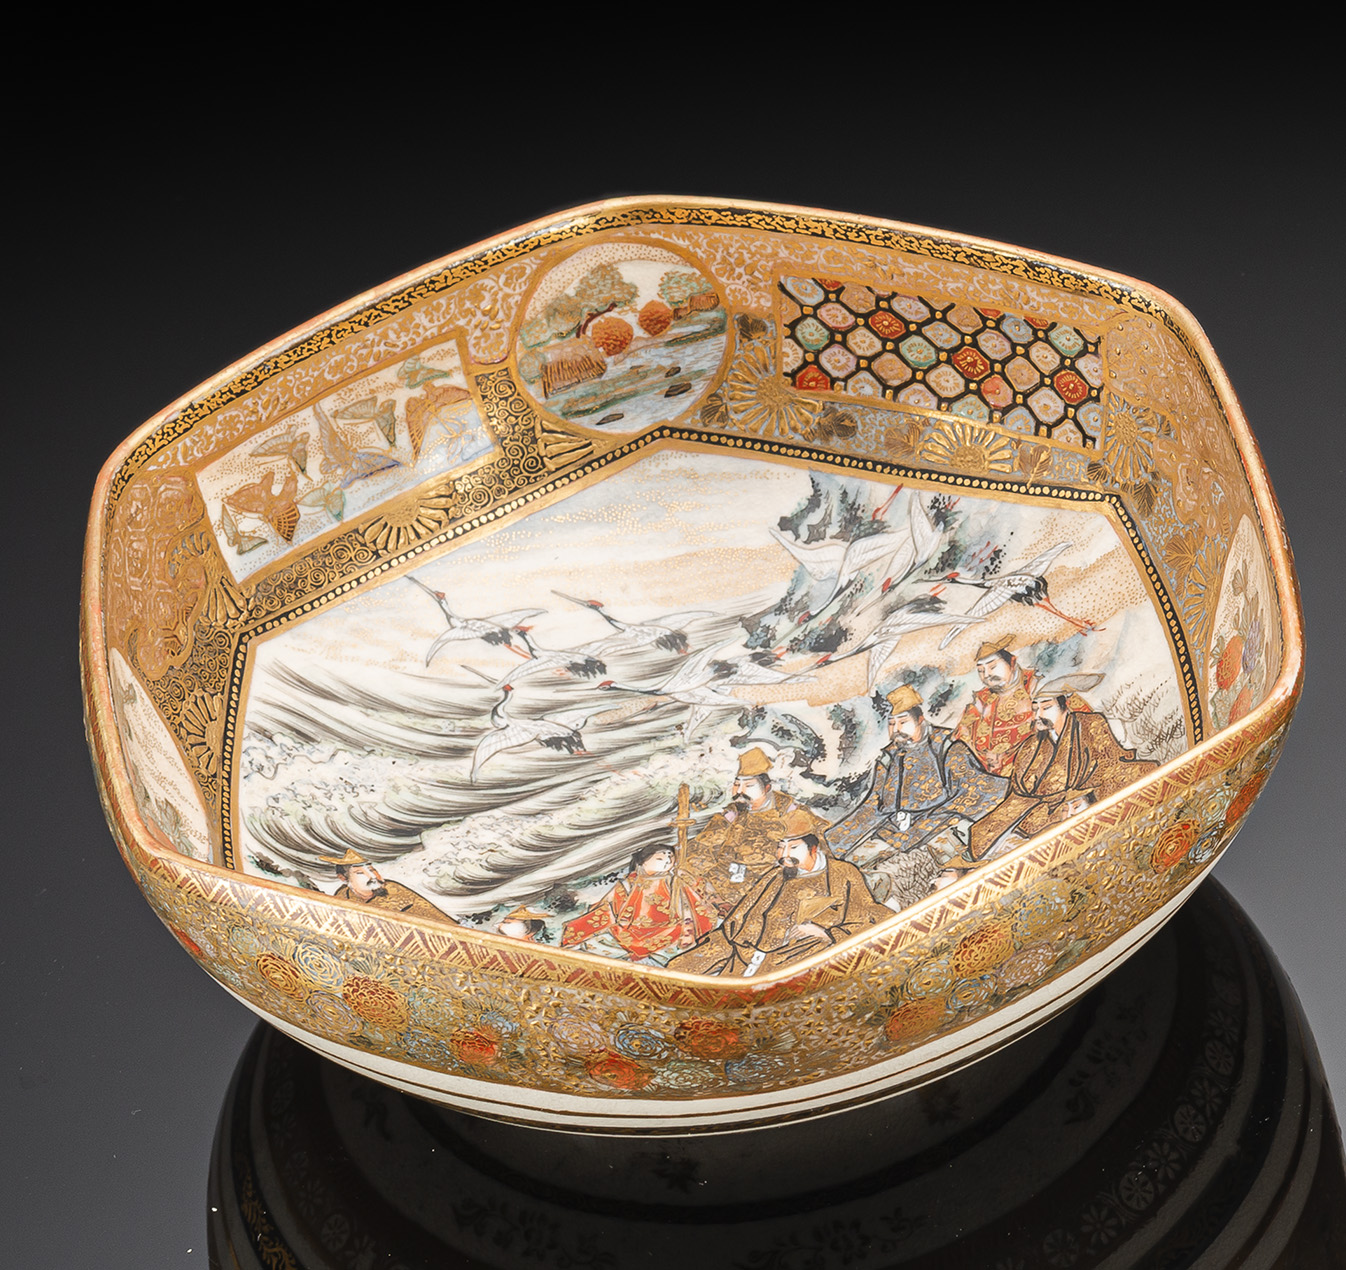 A SATSUMA BOWL WITH A FIGURAL SCENE, FISHER MEN AND CRANES